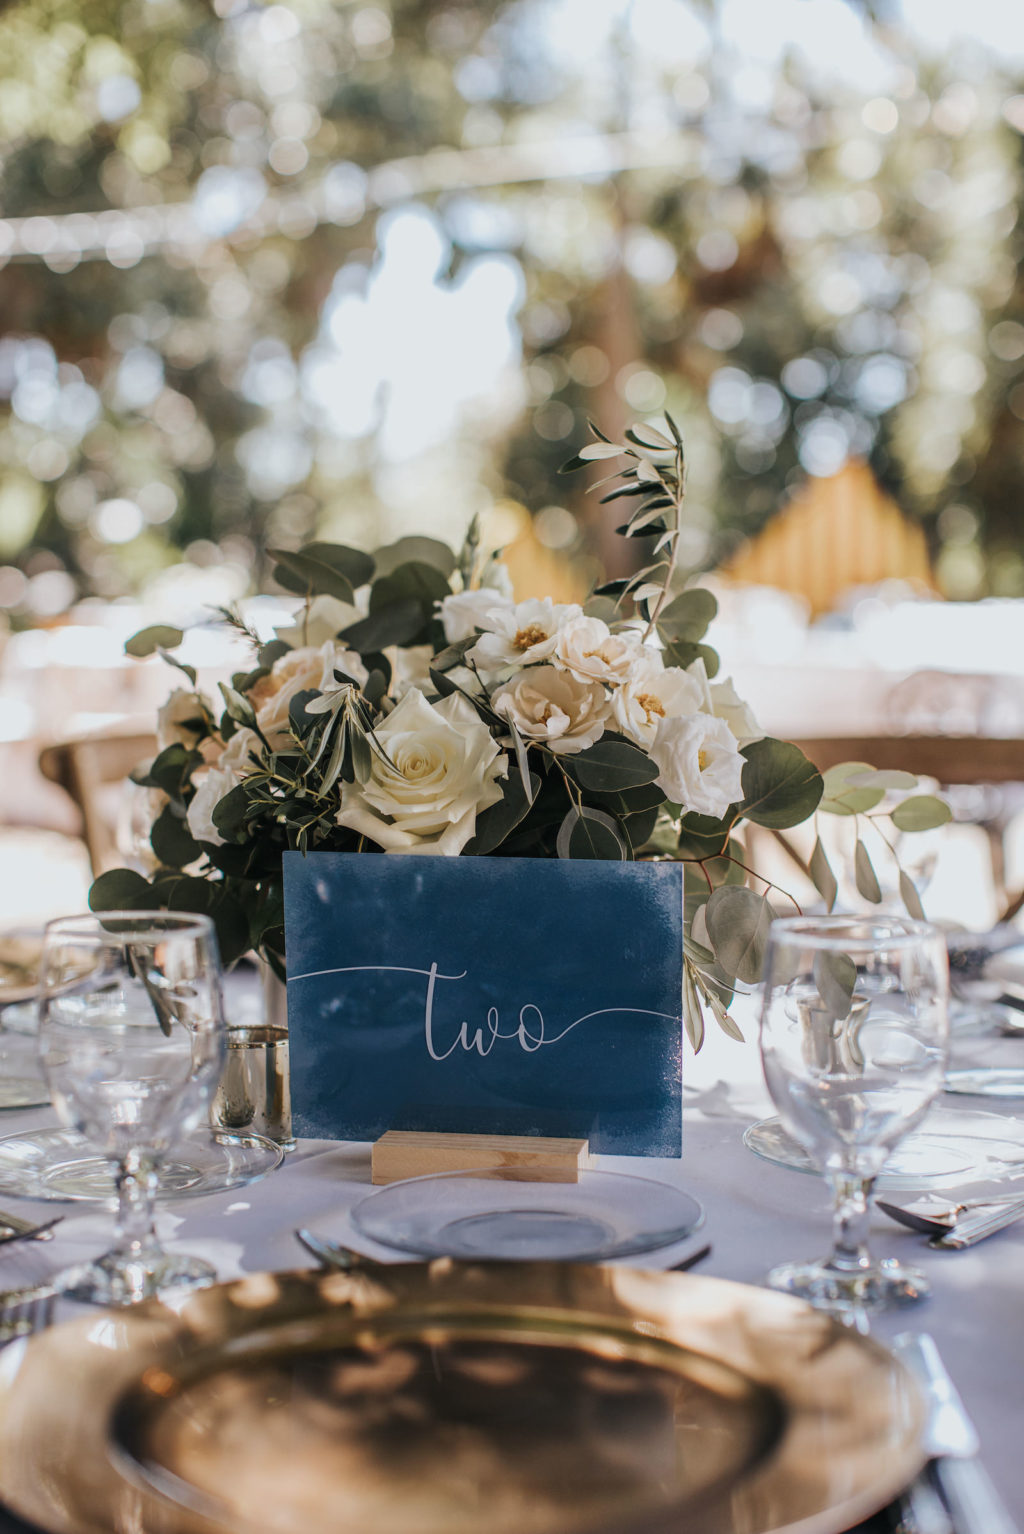 Blue Calligraphy Table Number with Gold Chargers and Ivory and Low Centerpieces with Greenery | Romantic Garden Wedding Reception Tablescape Inspiration